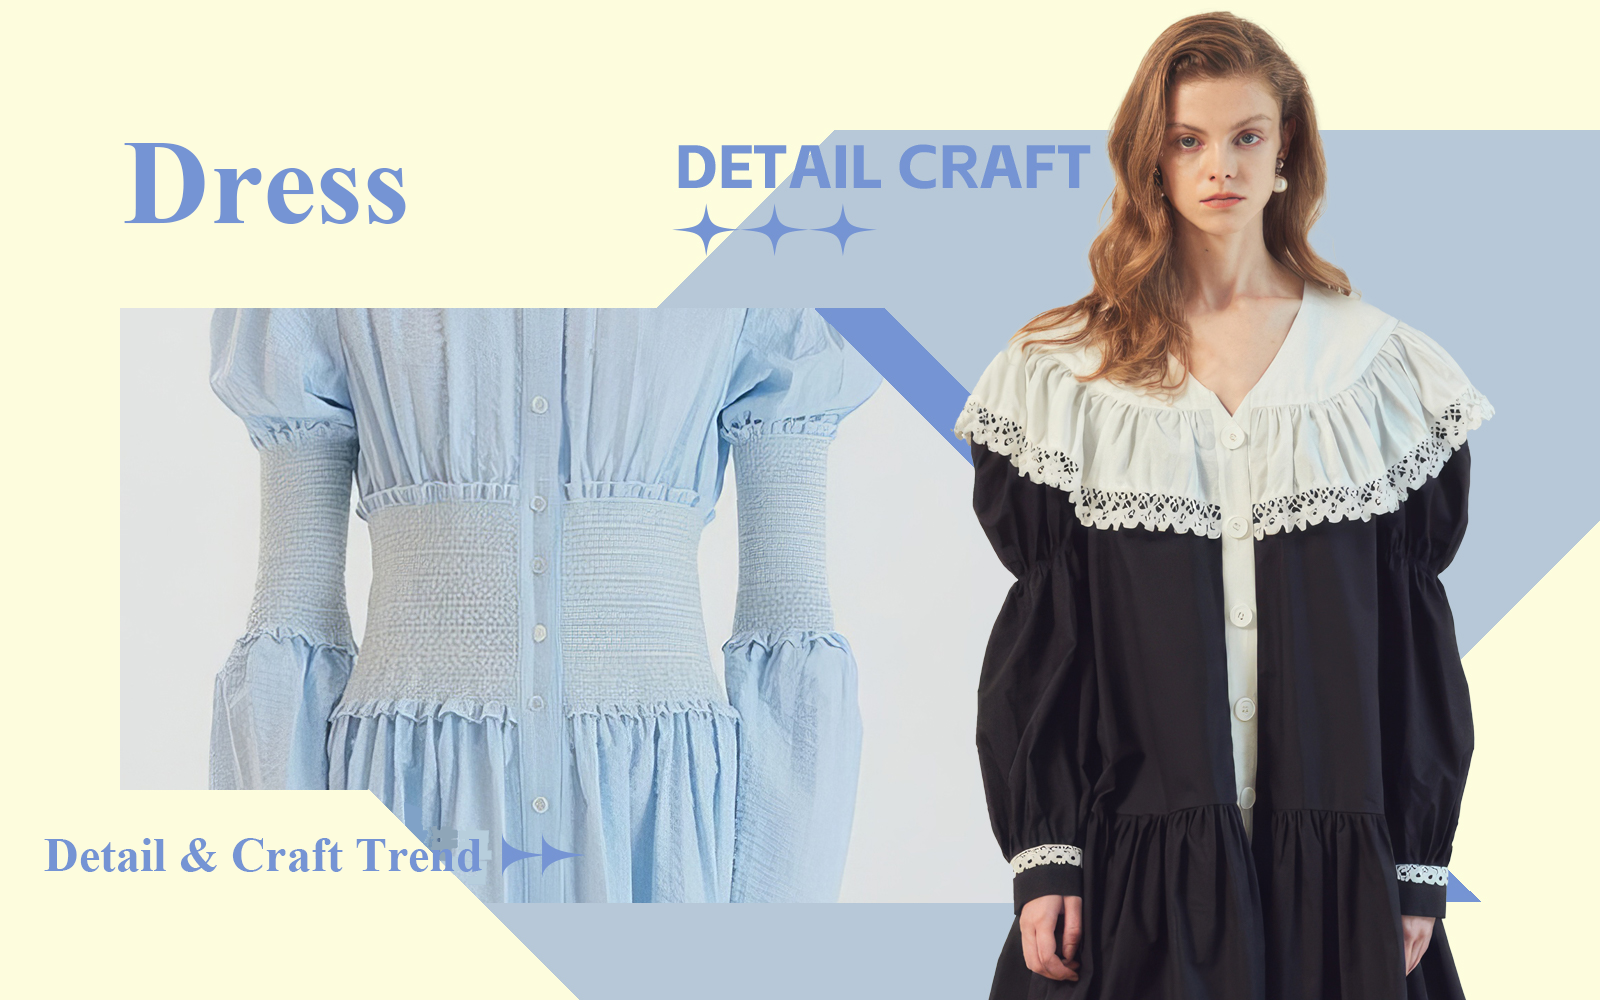 Korean Fashion -- The Detail & Craft Trend for Dress